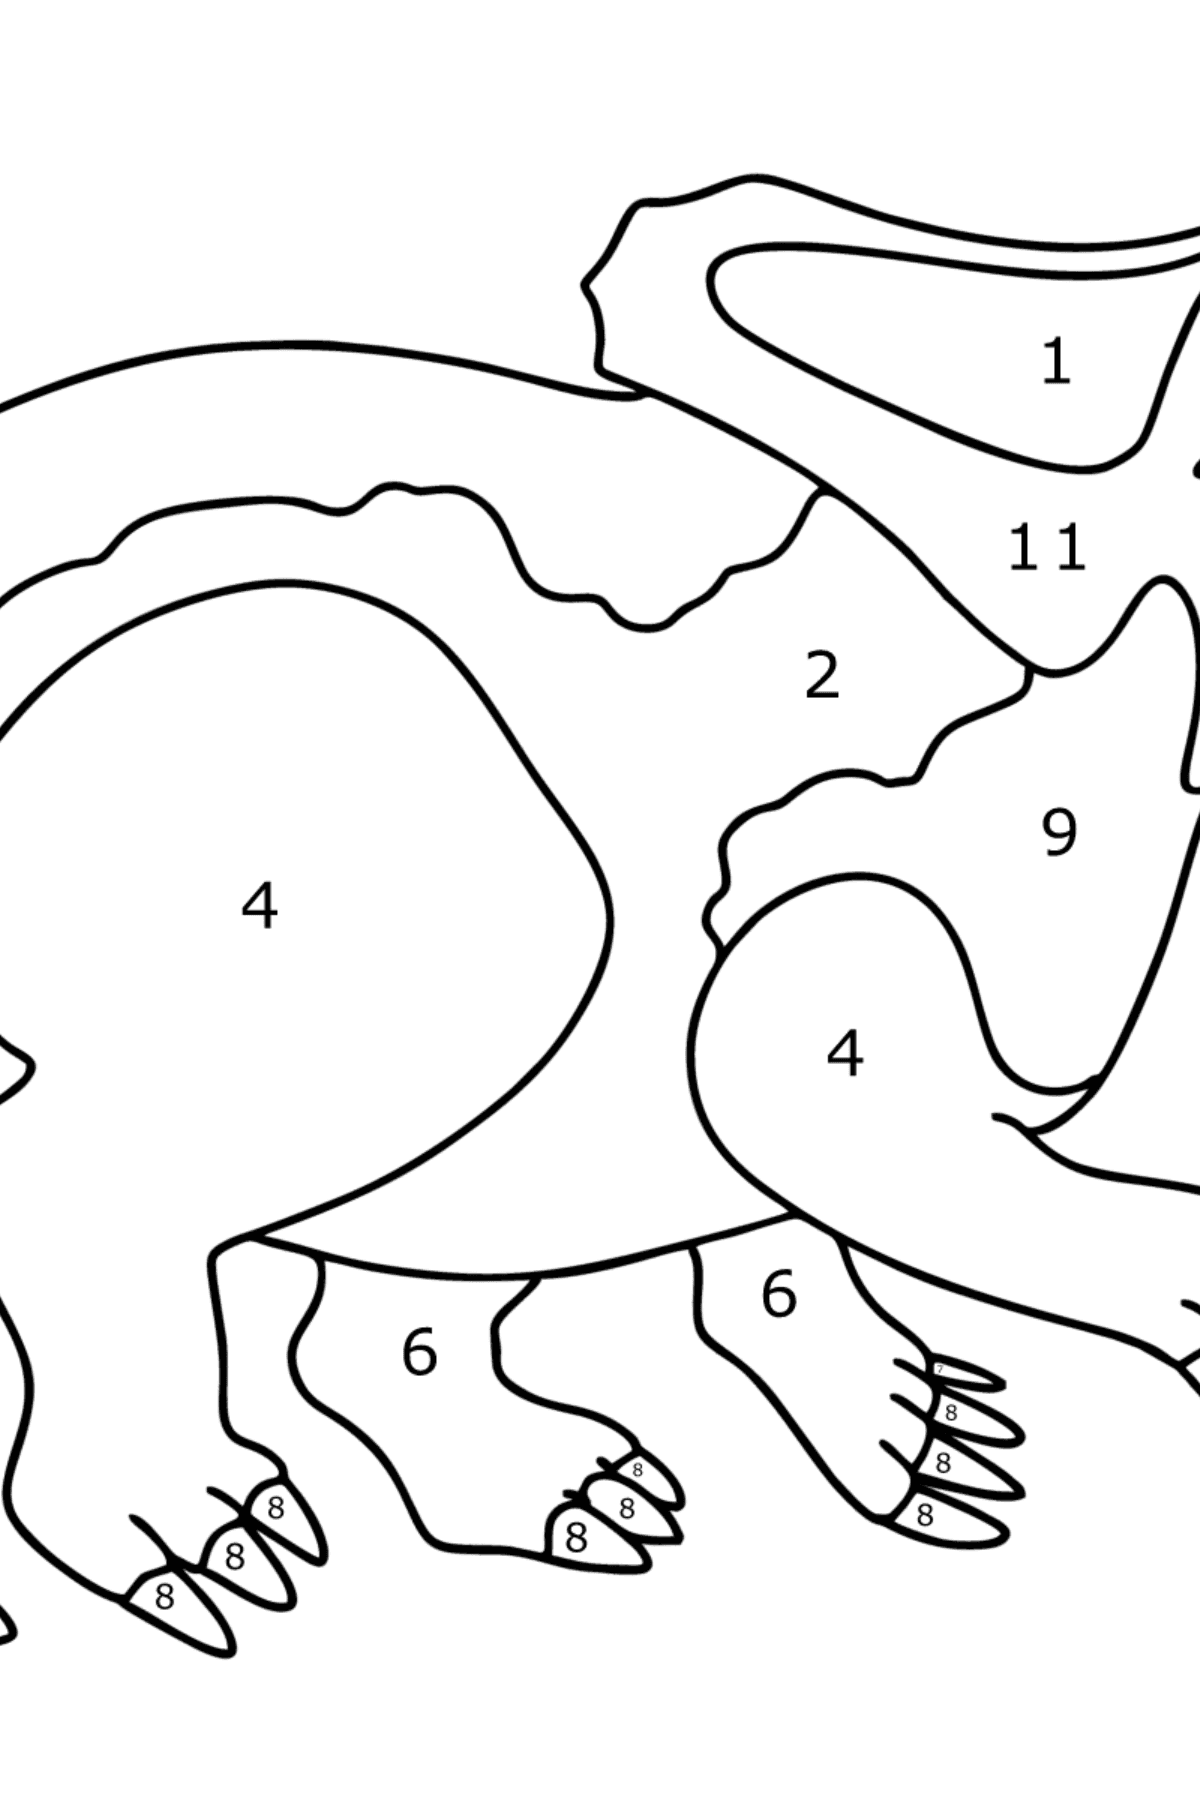 Protoceratops coloring page - Coloring by Numbers for Kids